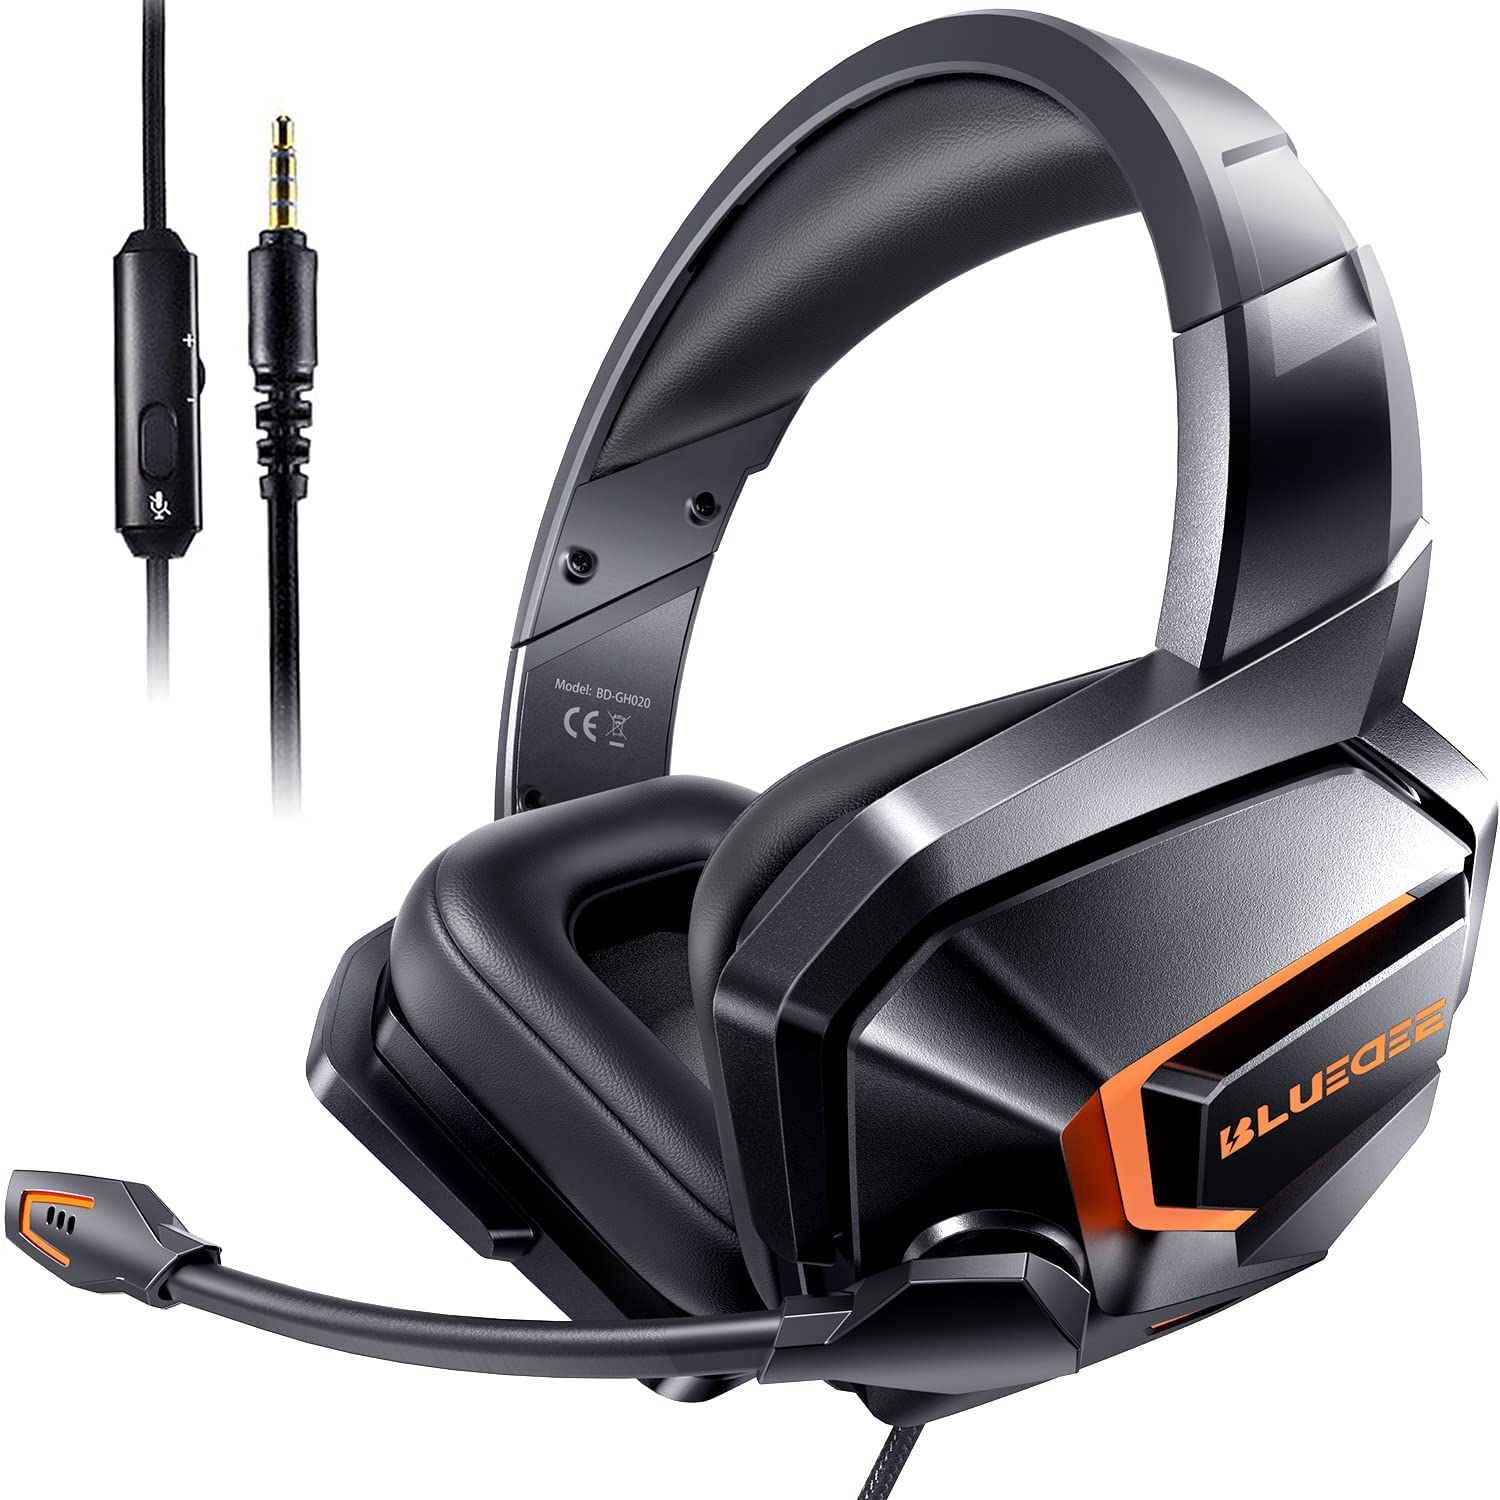 Top 8 Best Gaming Headsets under $100